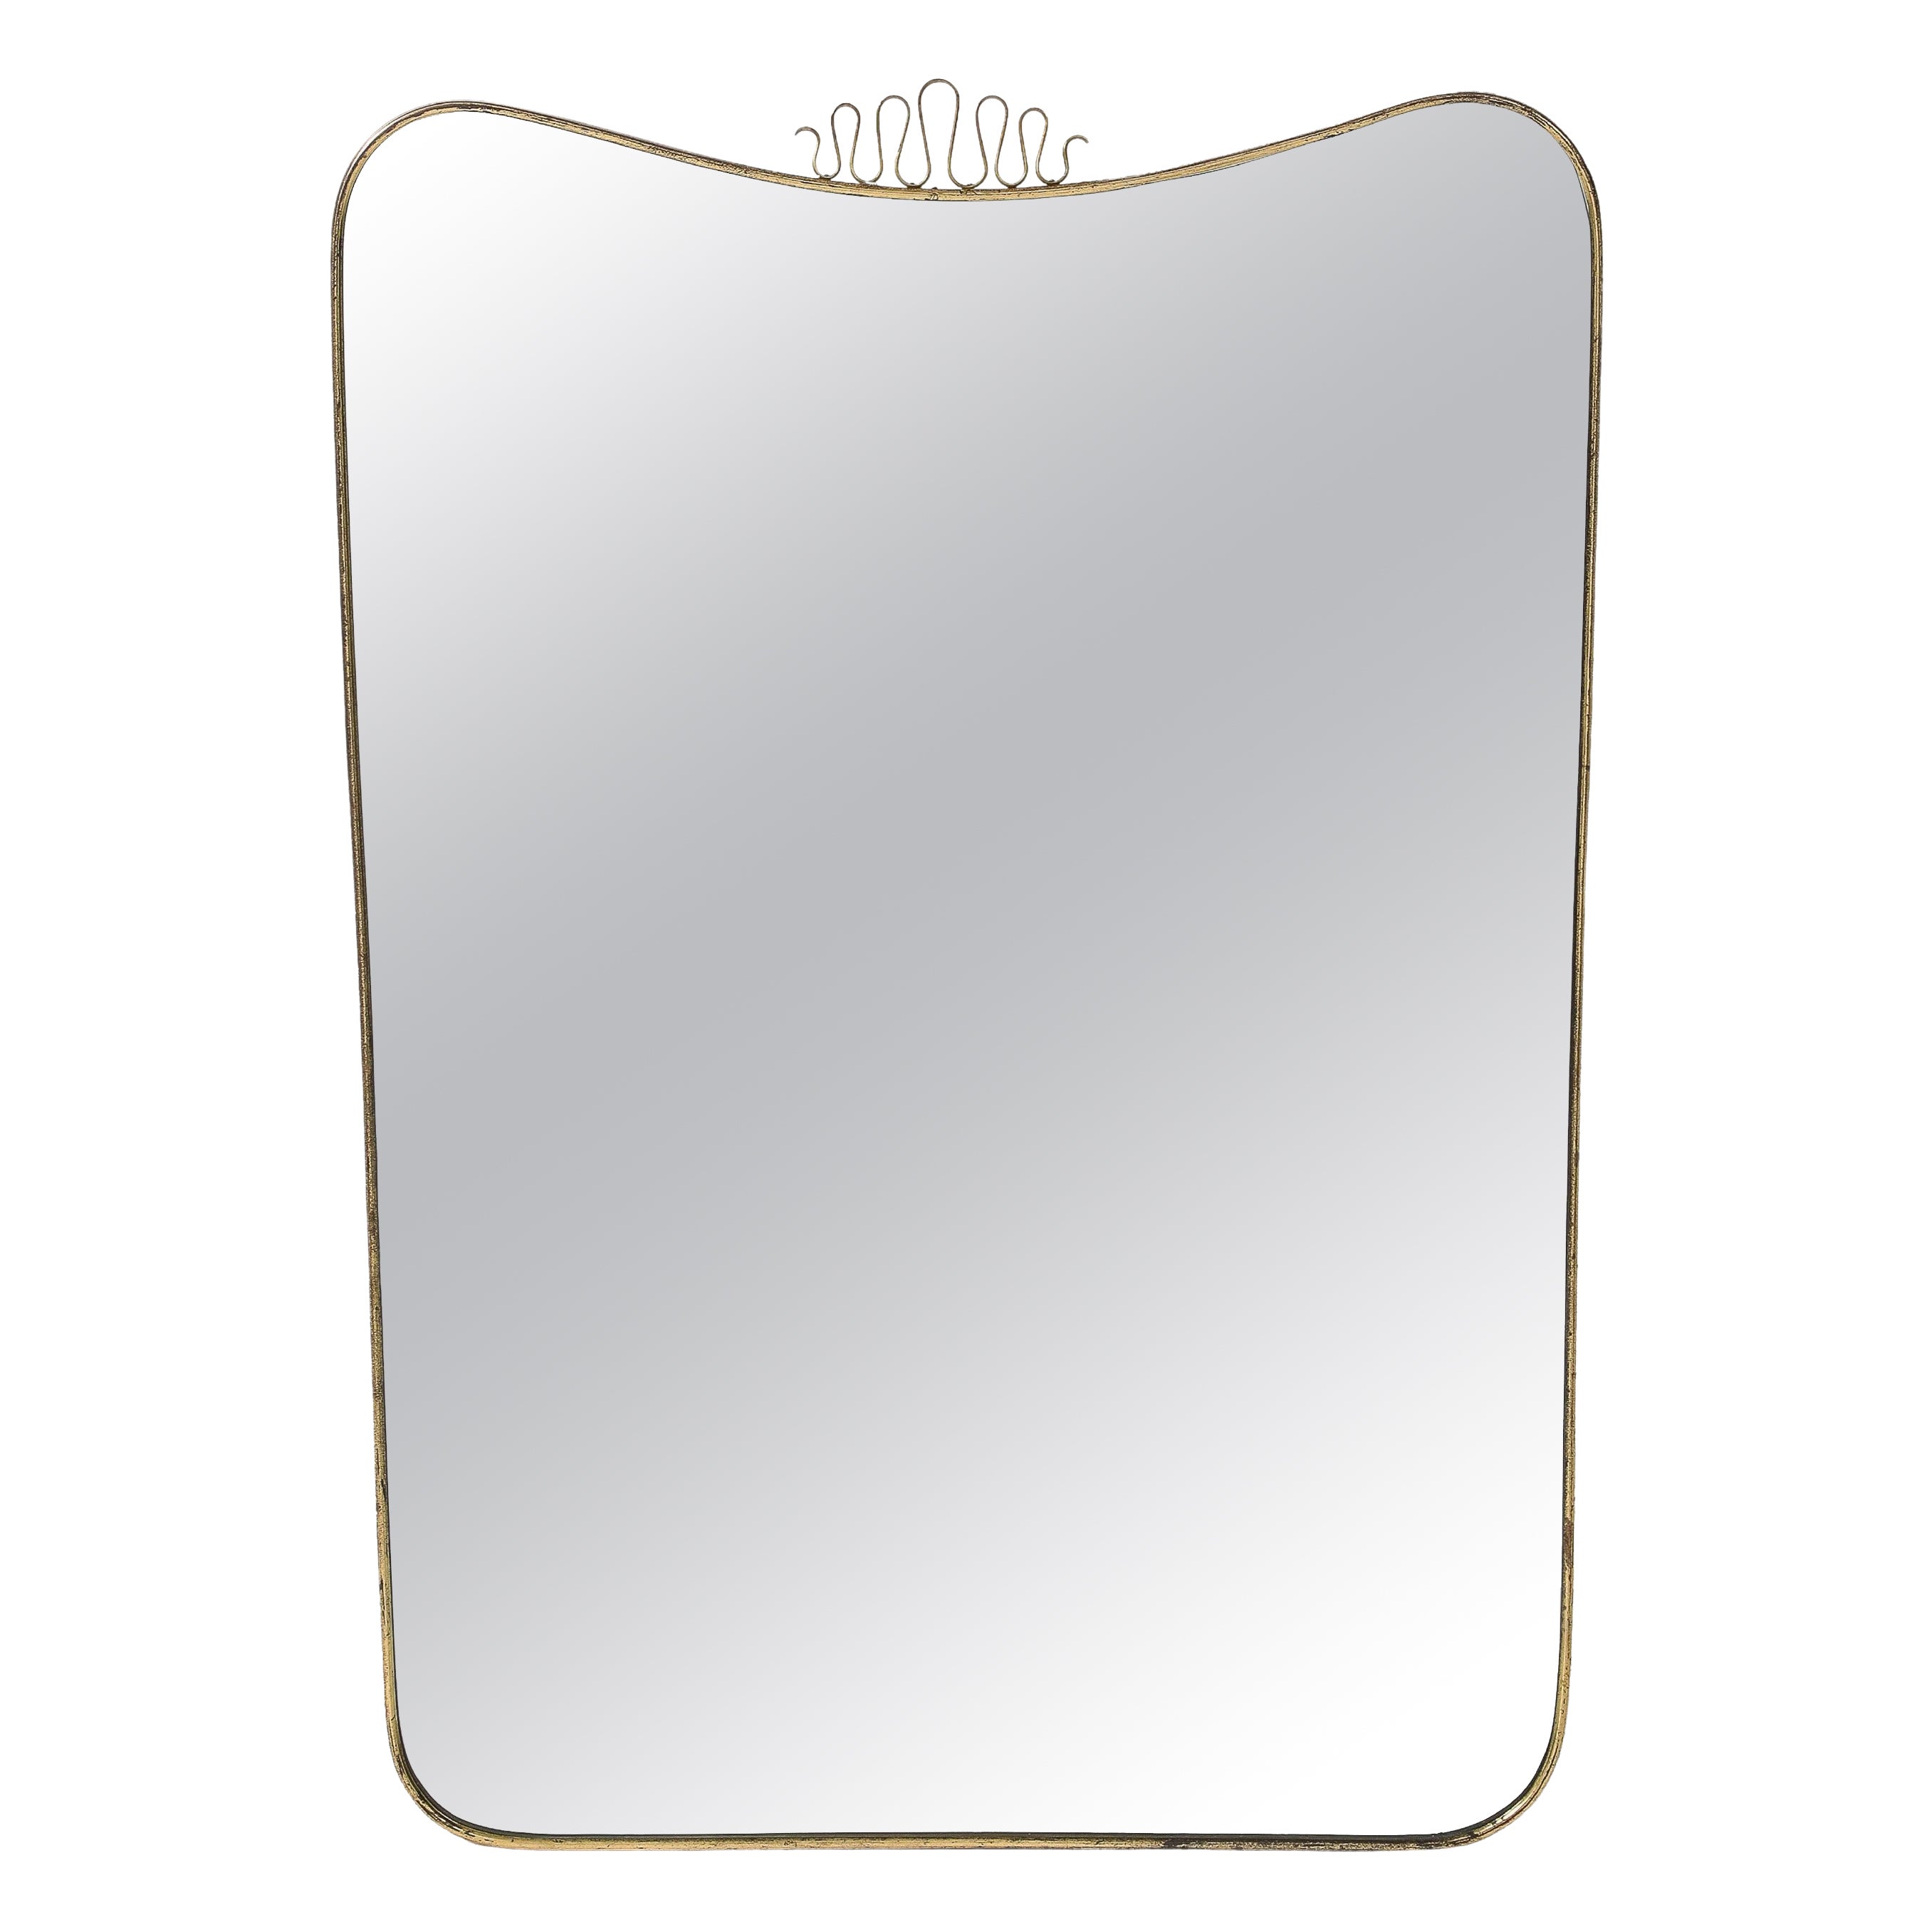 Midcentury Italian Modernist Scroll Top Brass Mirror in the Style of Gio Ponti For Sale